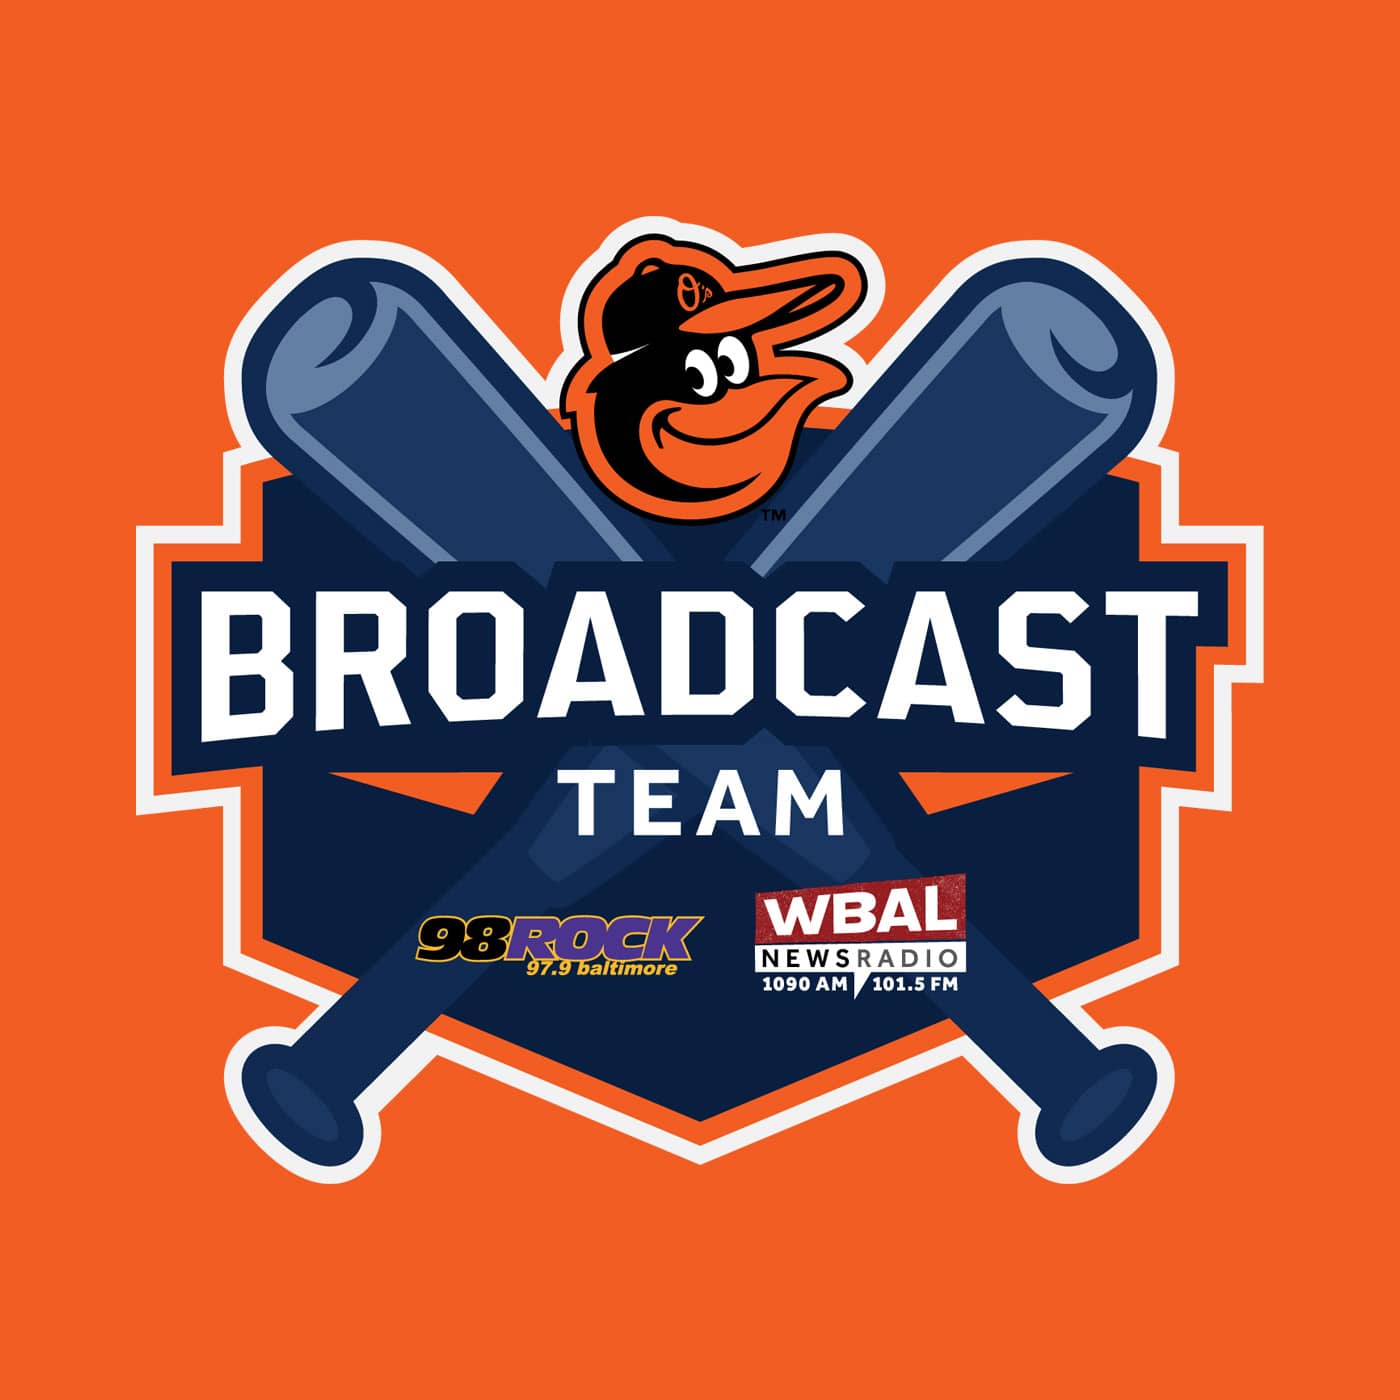 The Baltimore Orioles Insider